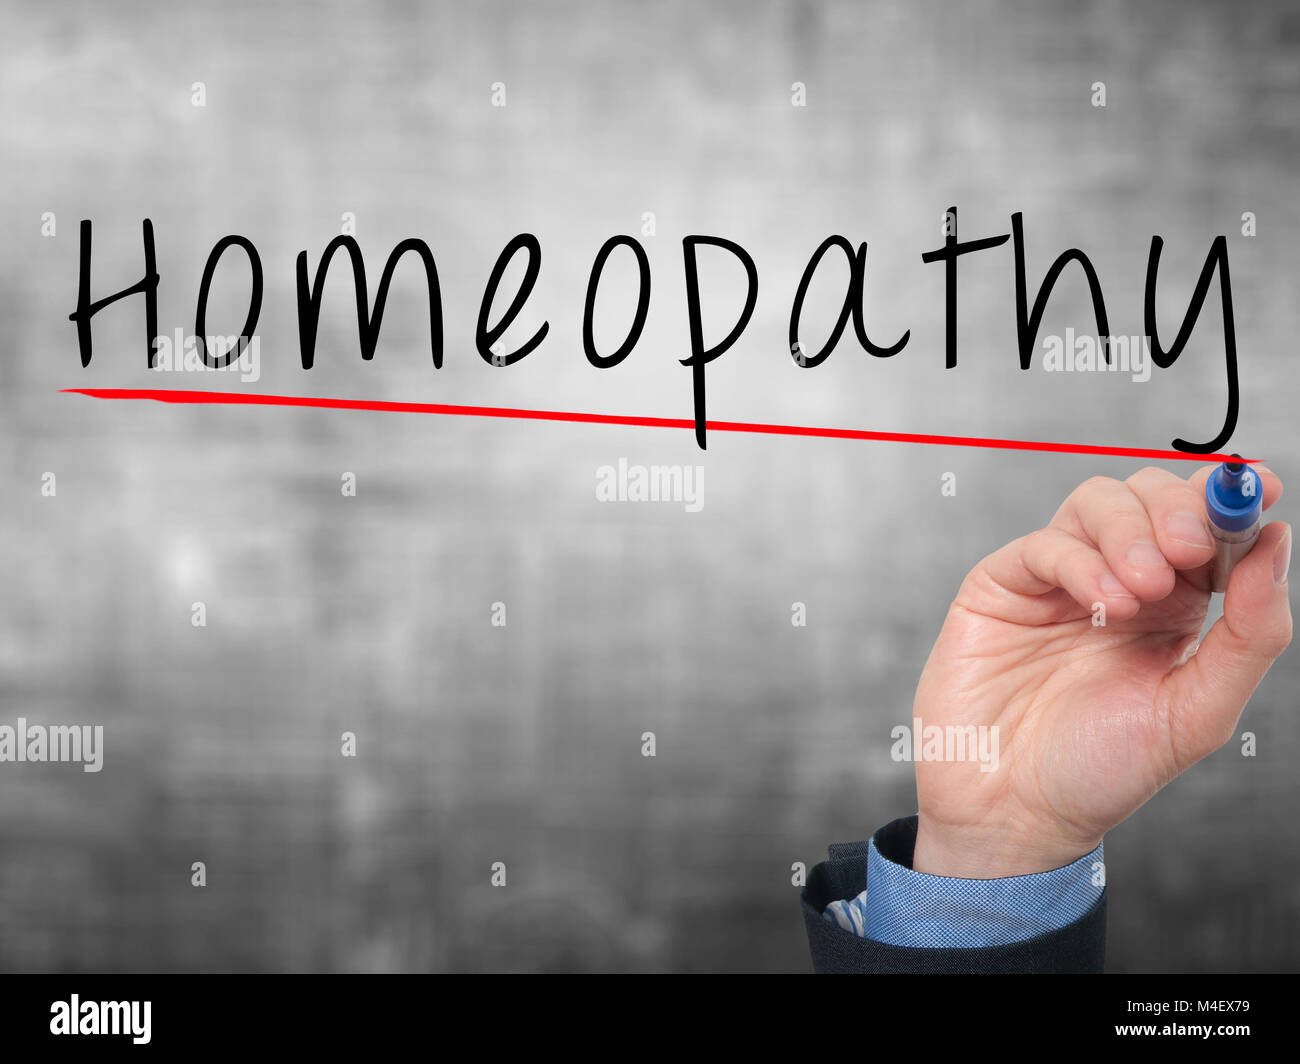 Man Hand writing Homeopathy with marker on transparent wipe board Stock Photo